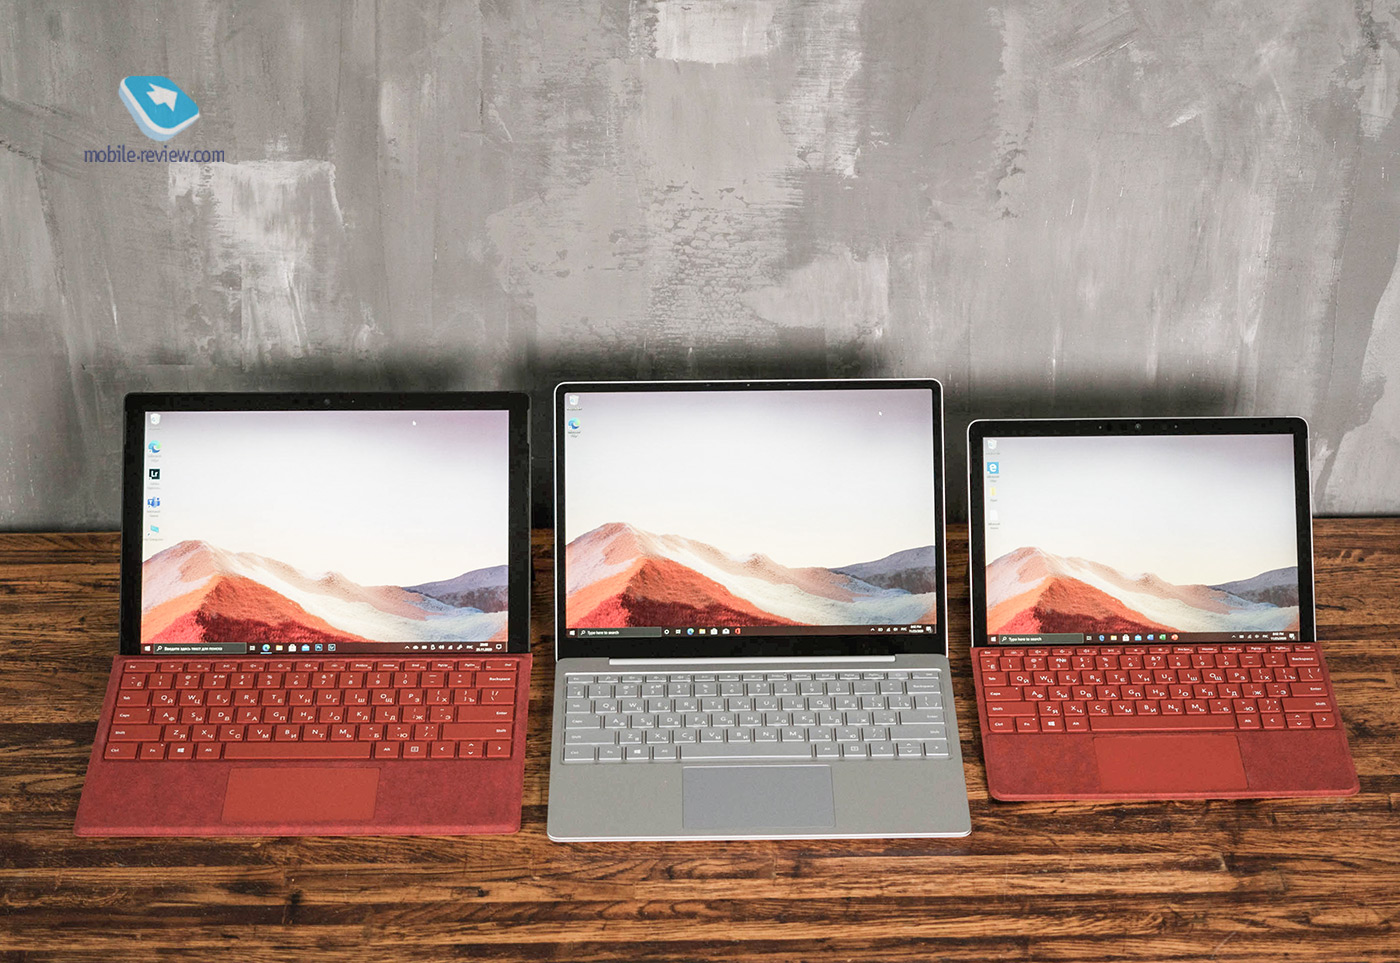 Review of the premium budget Microsoft Surface Laptop Go